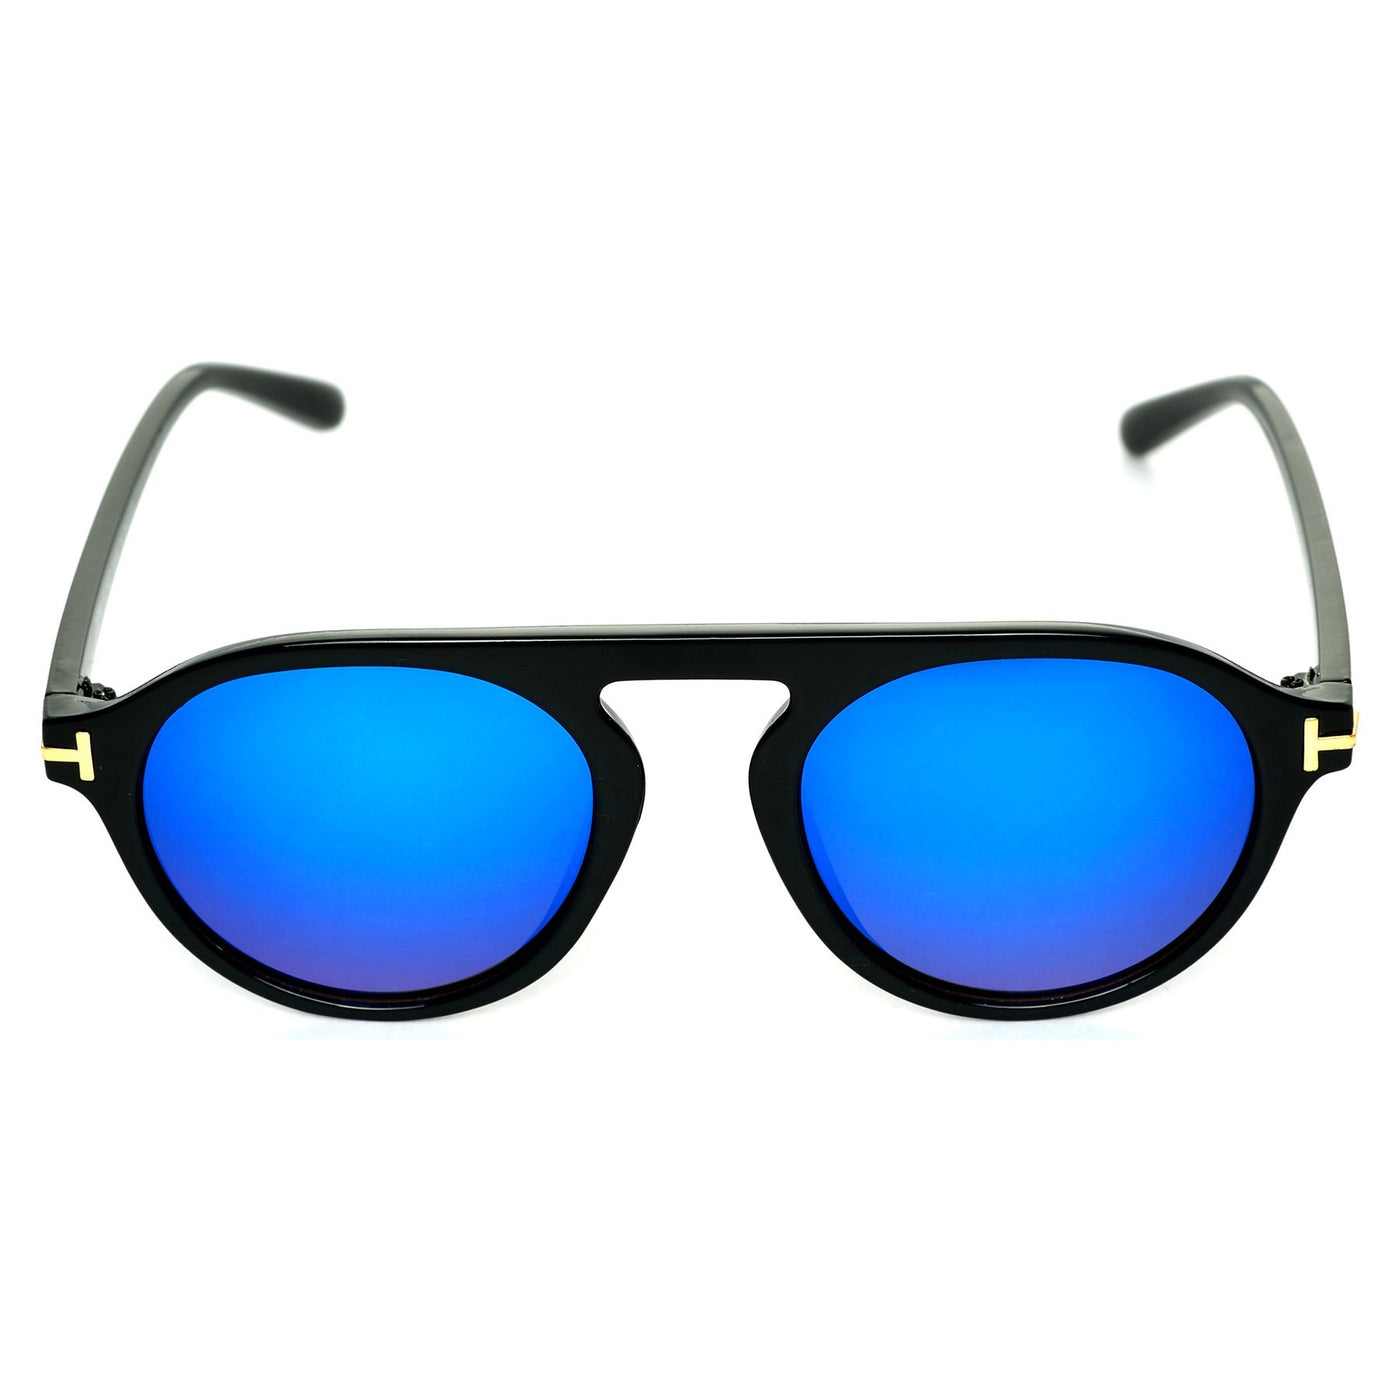 Round Blue And Black Sunglasses For Men And Women-Unique and Classy